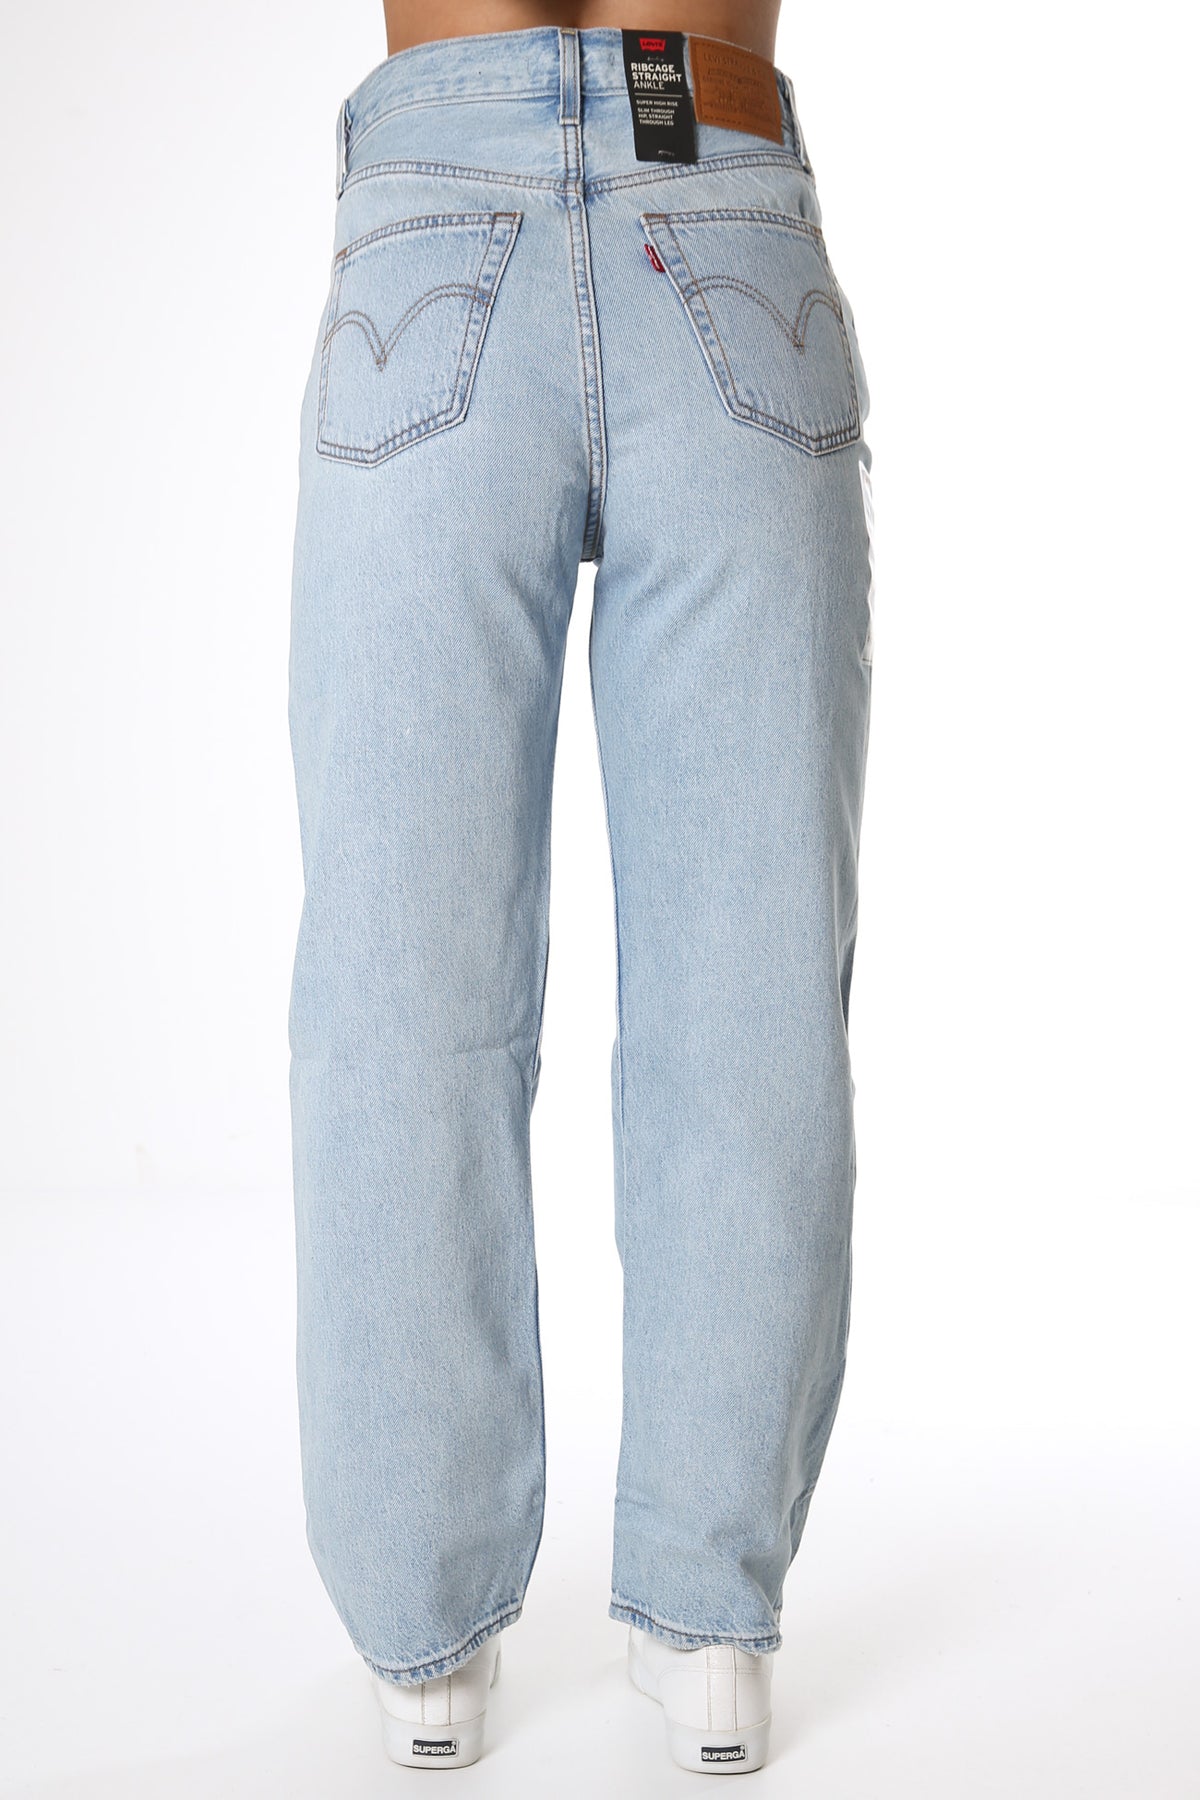 Ribcage Straight Ankle Jeans Middle Road - Jean Jail